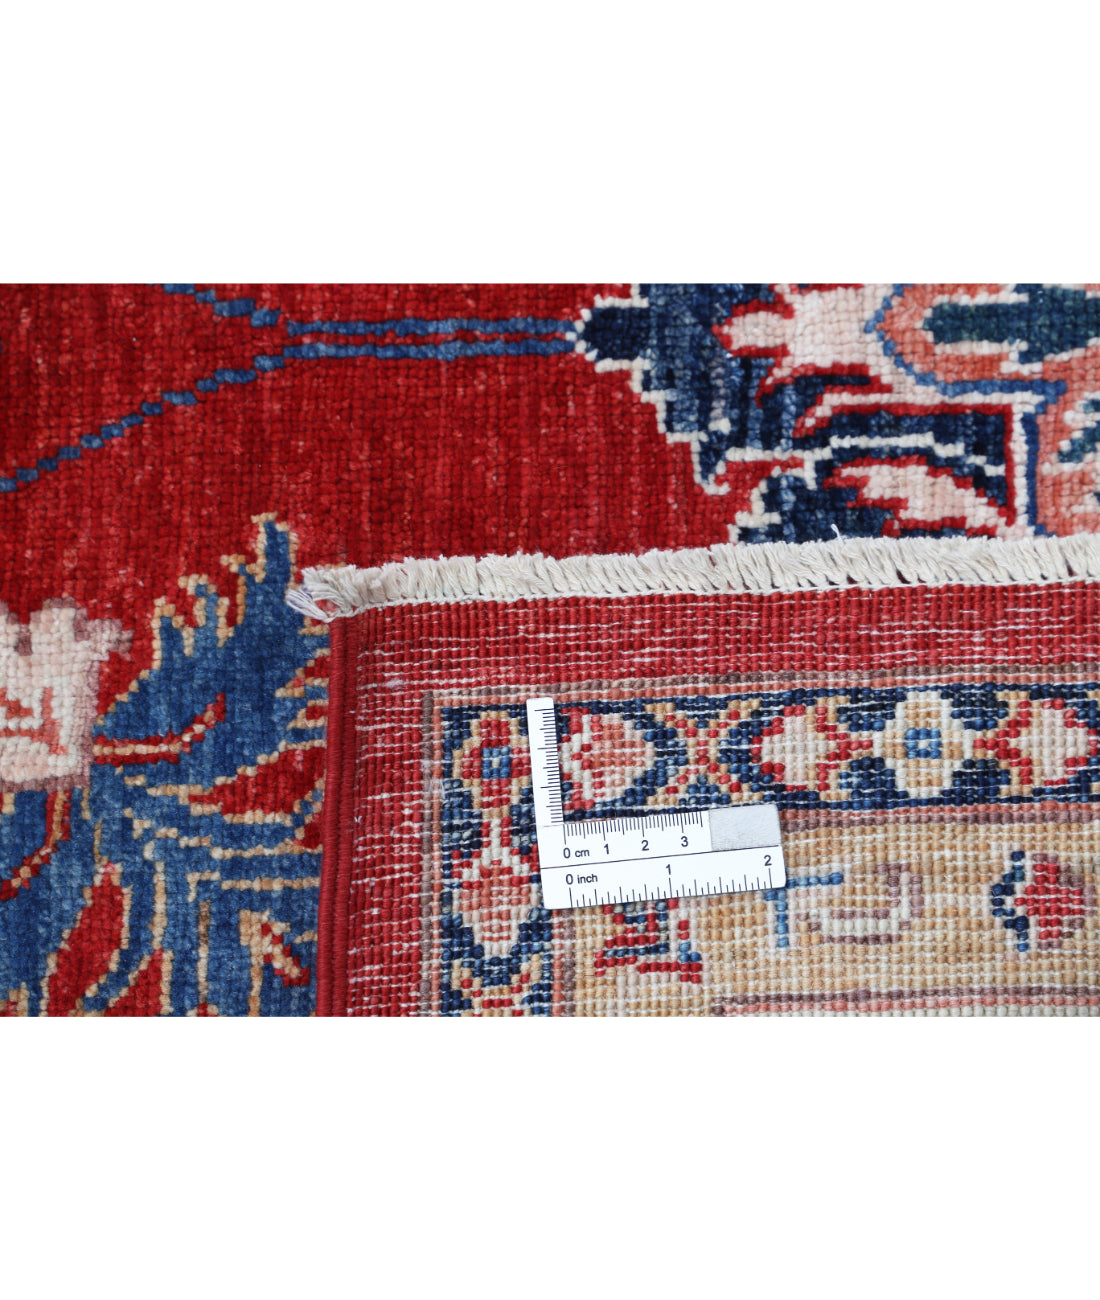 Hand Knotted Ziegler Farhan Wool Rug - 6'6'' x 9'4'' 6'6'' x 9'4'' (195 X 280) / Red / Ivory